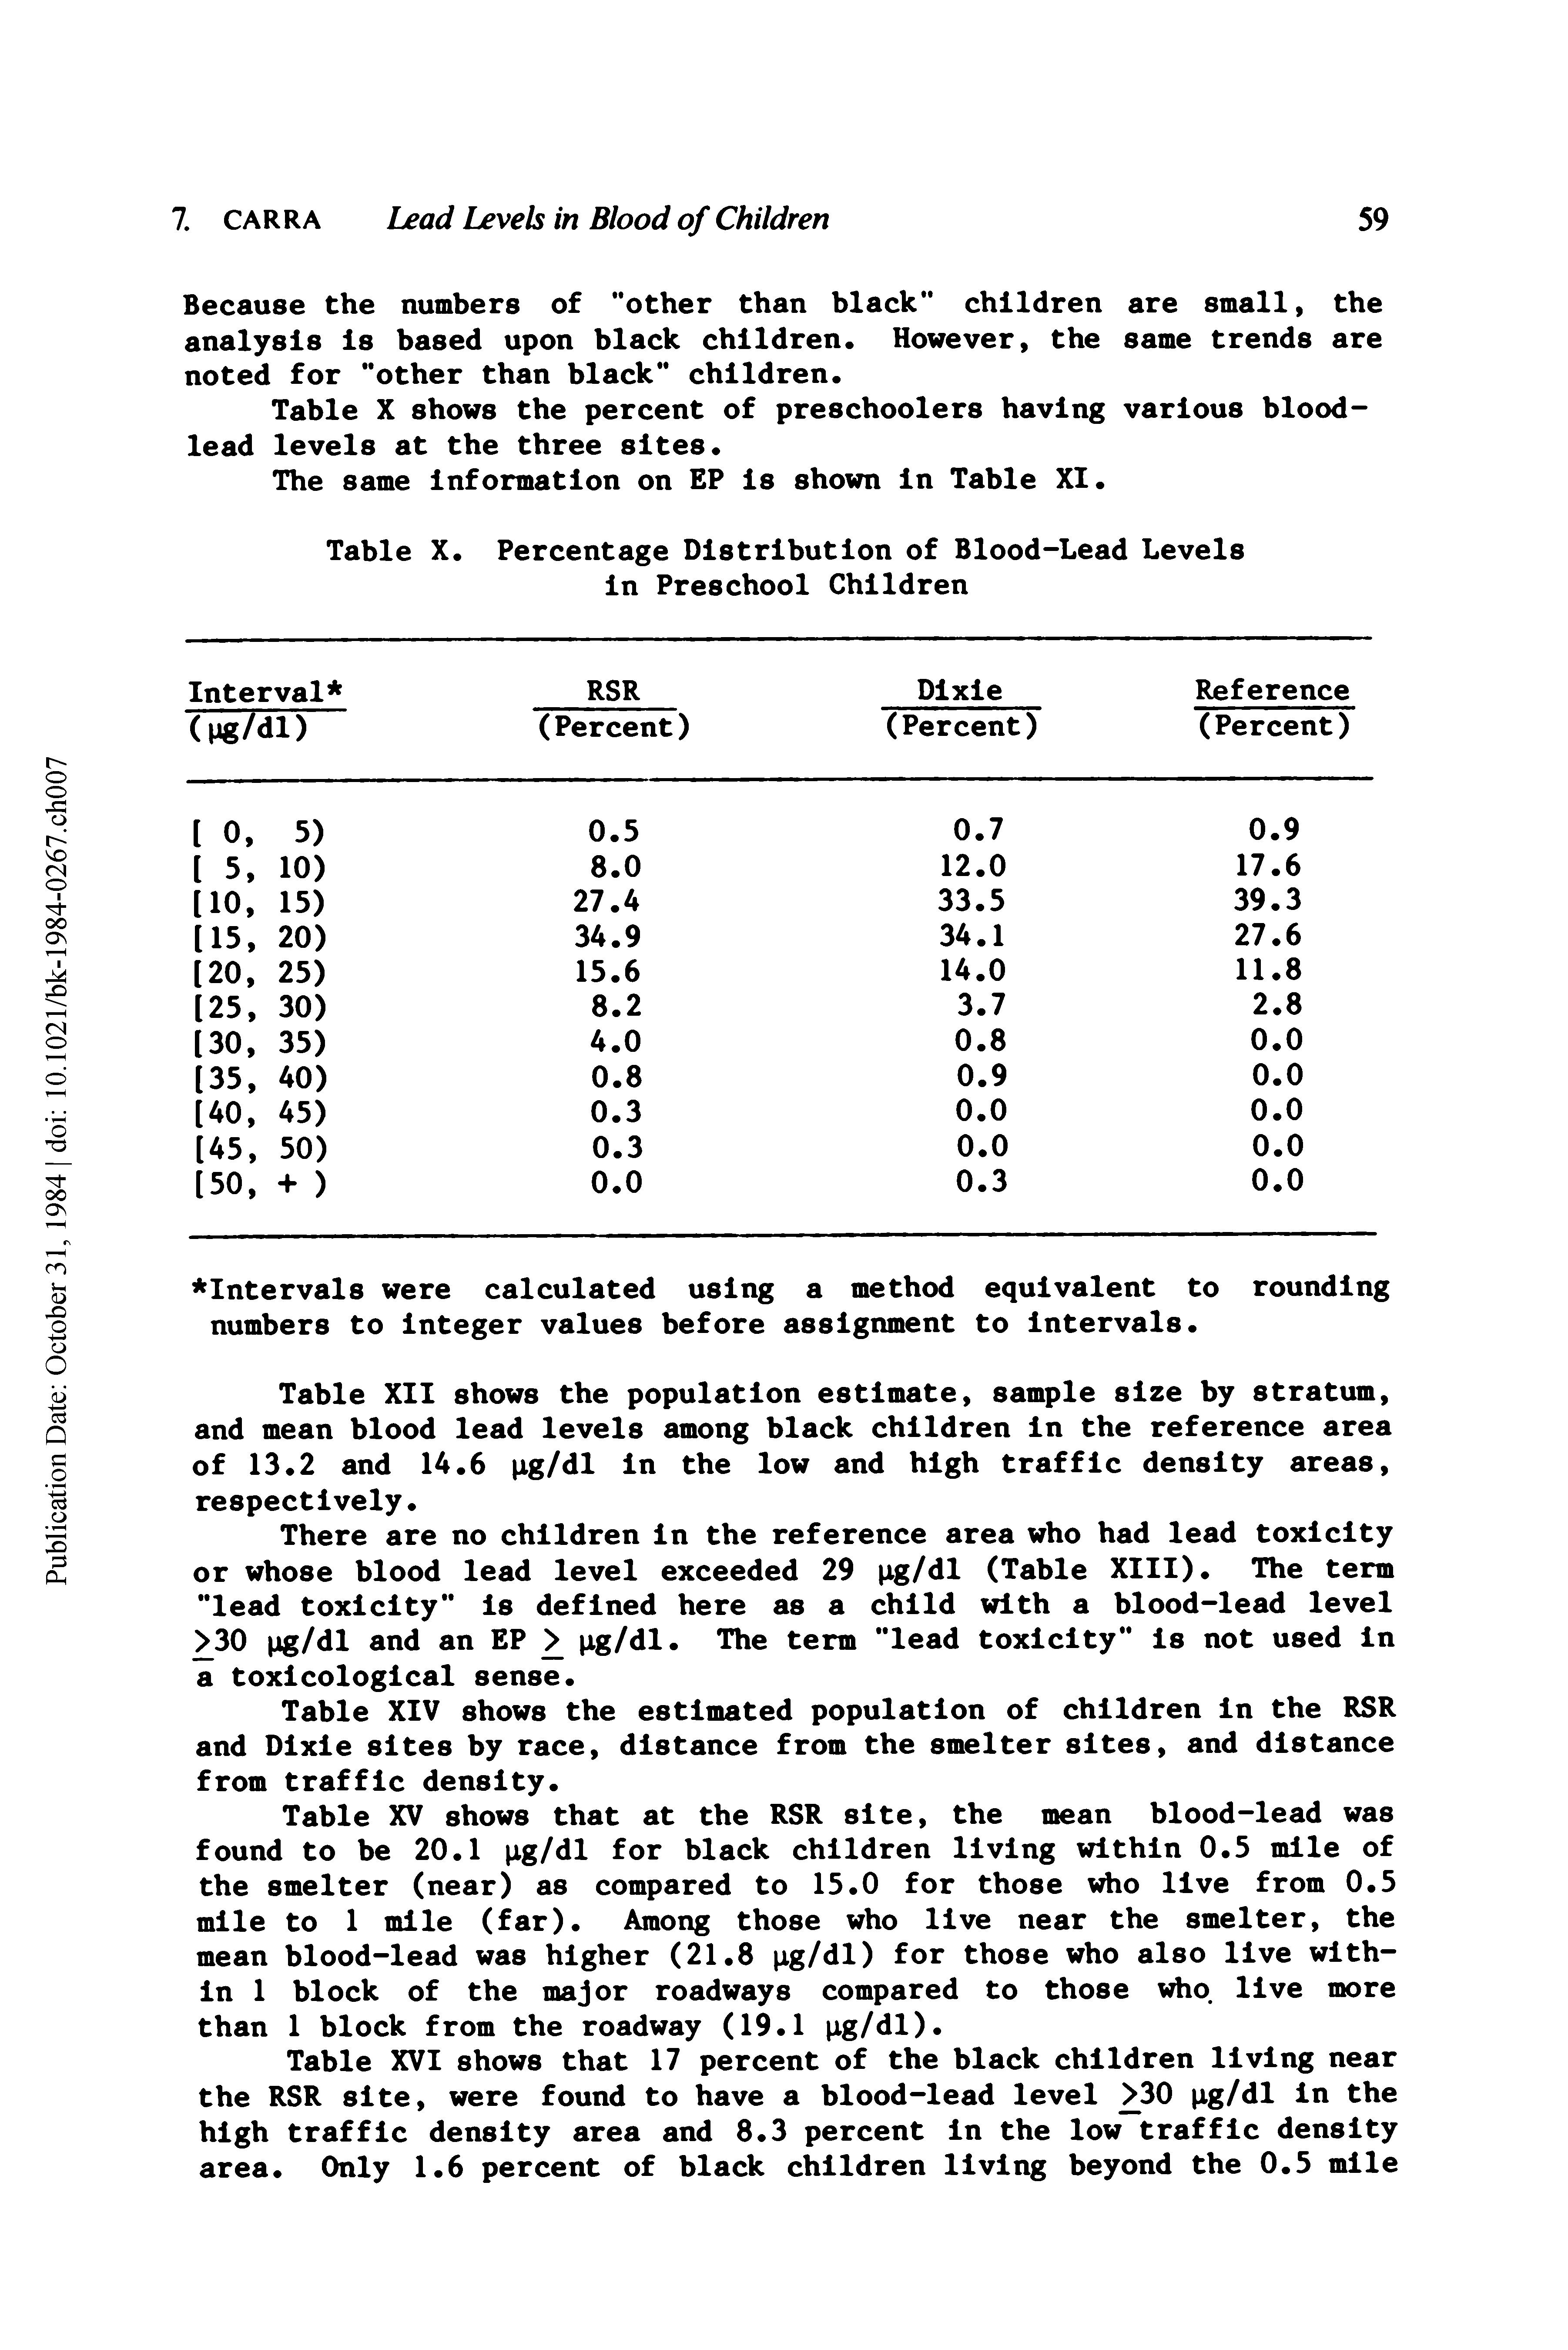 Table XIV shows the estimated population of children In the RSR and Dixie sites by race, distance from the smelter sites, and distance from traffic density.